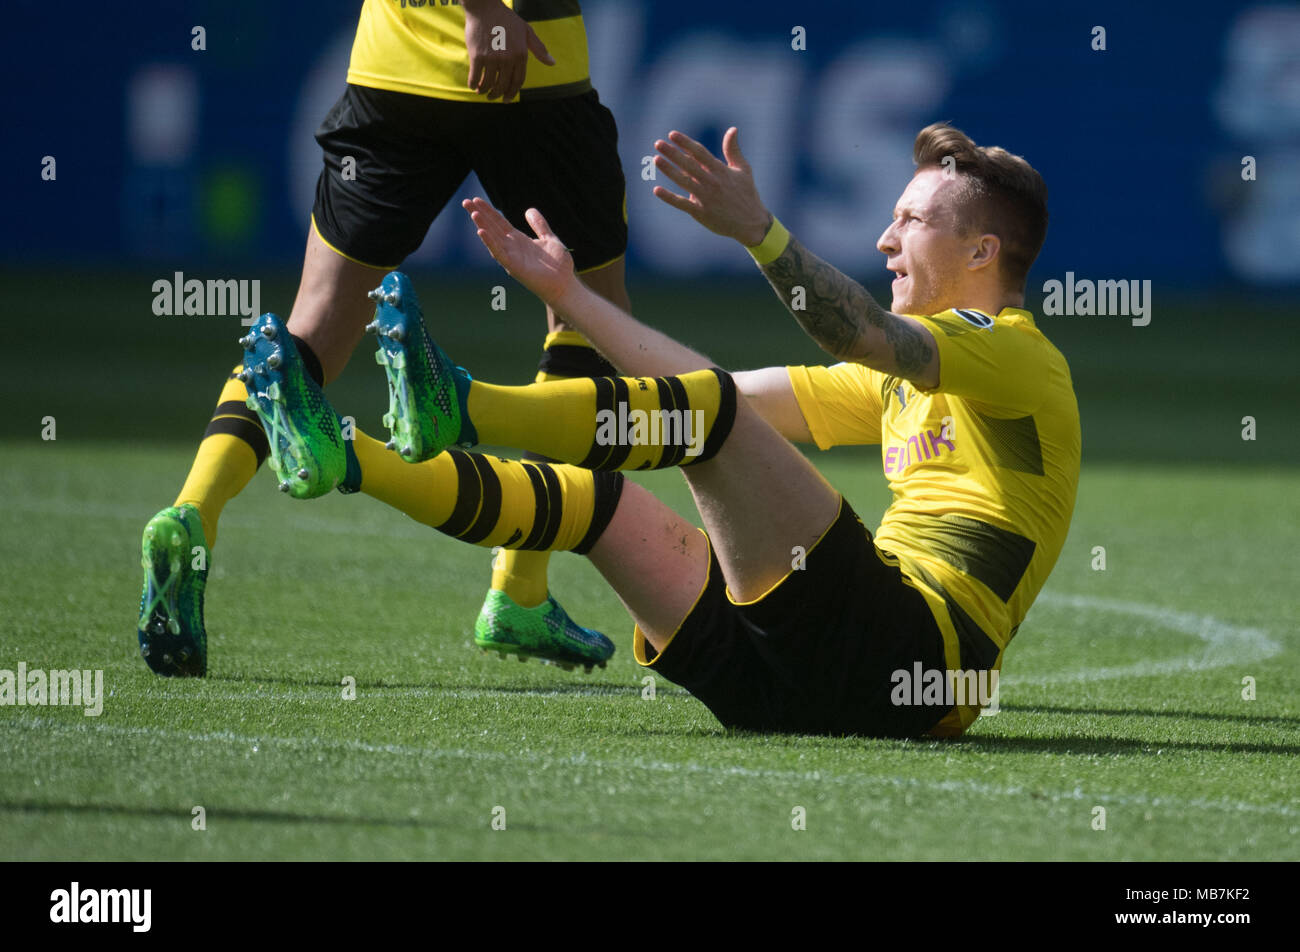 08 April 2018, Germany, Dortmund. Football German Bundesliga, Borussia Dortmund vs VfB Stuttgart at the Signal Iduna Park. Dortmund's Marco Reus on the pitch. Photo: Bernd Thissen/dpa - IMPORTANT NOTICE: Due to the German Football League·s (DFL) accreditation regulations, publication and redistribution online and in online media is limited during the match to fifteen images per match Stock Photo